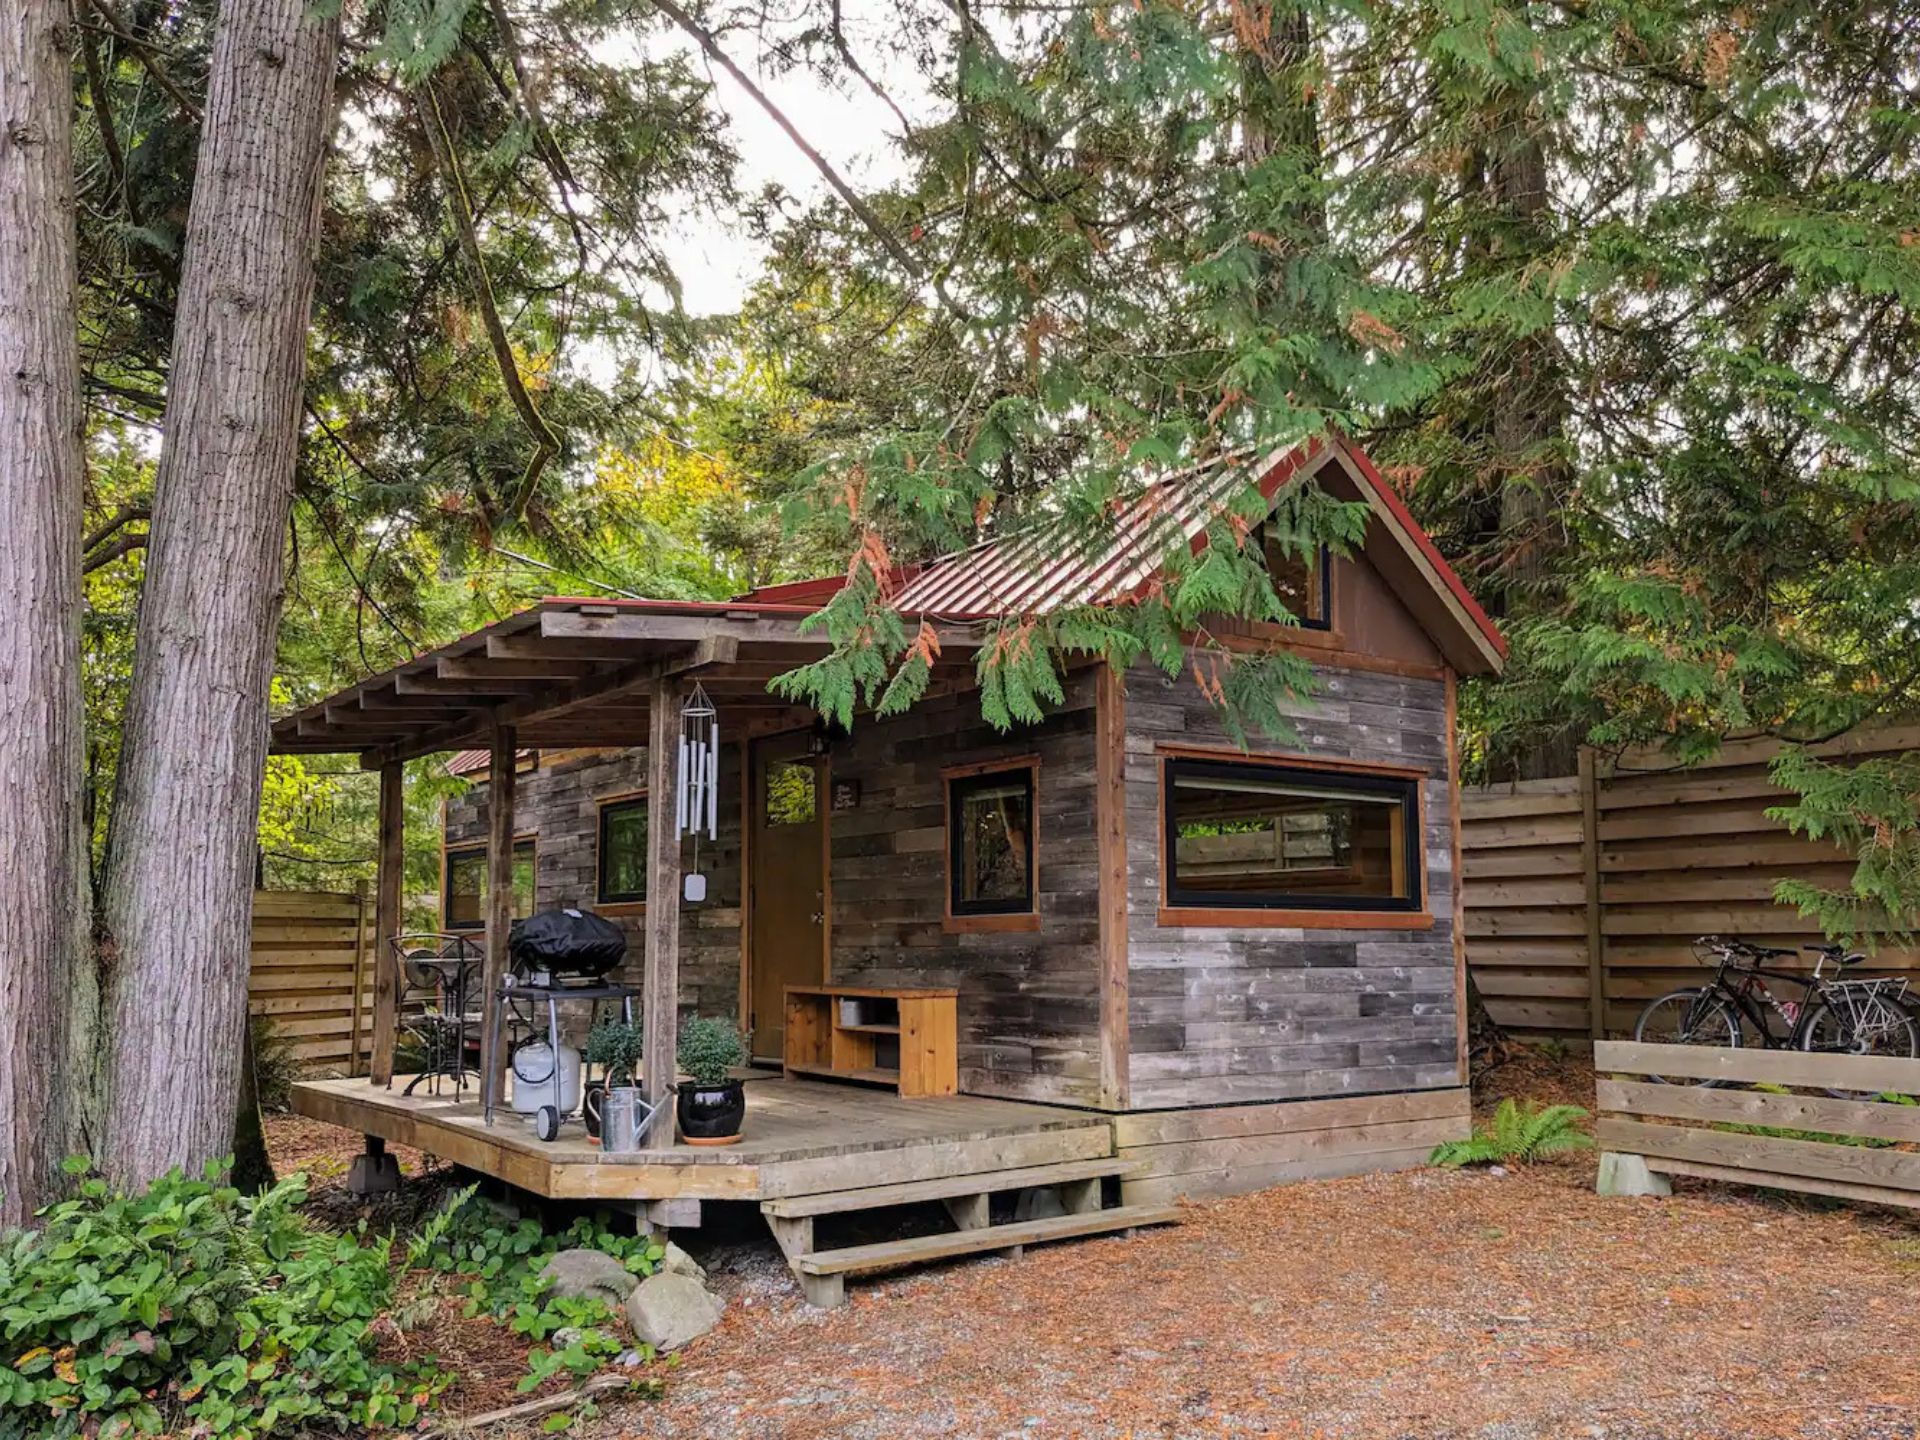 This Pocket-Sized Rustic Home Is The Coziest Place You’re Going To See Today